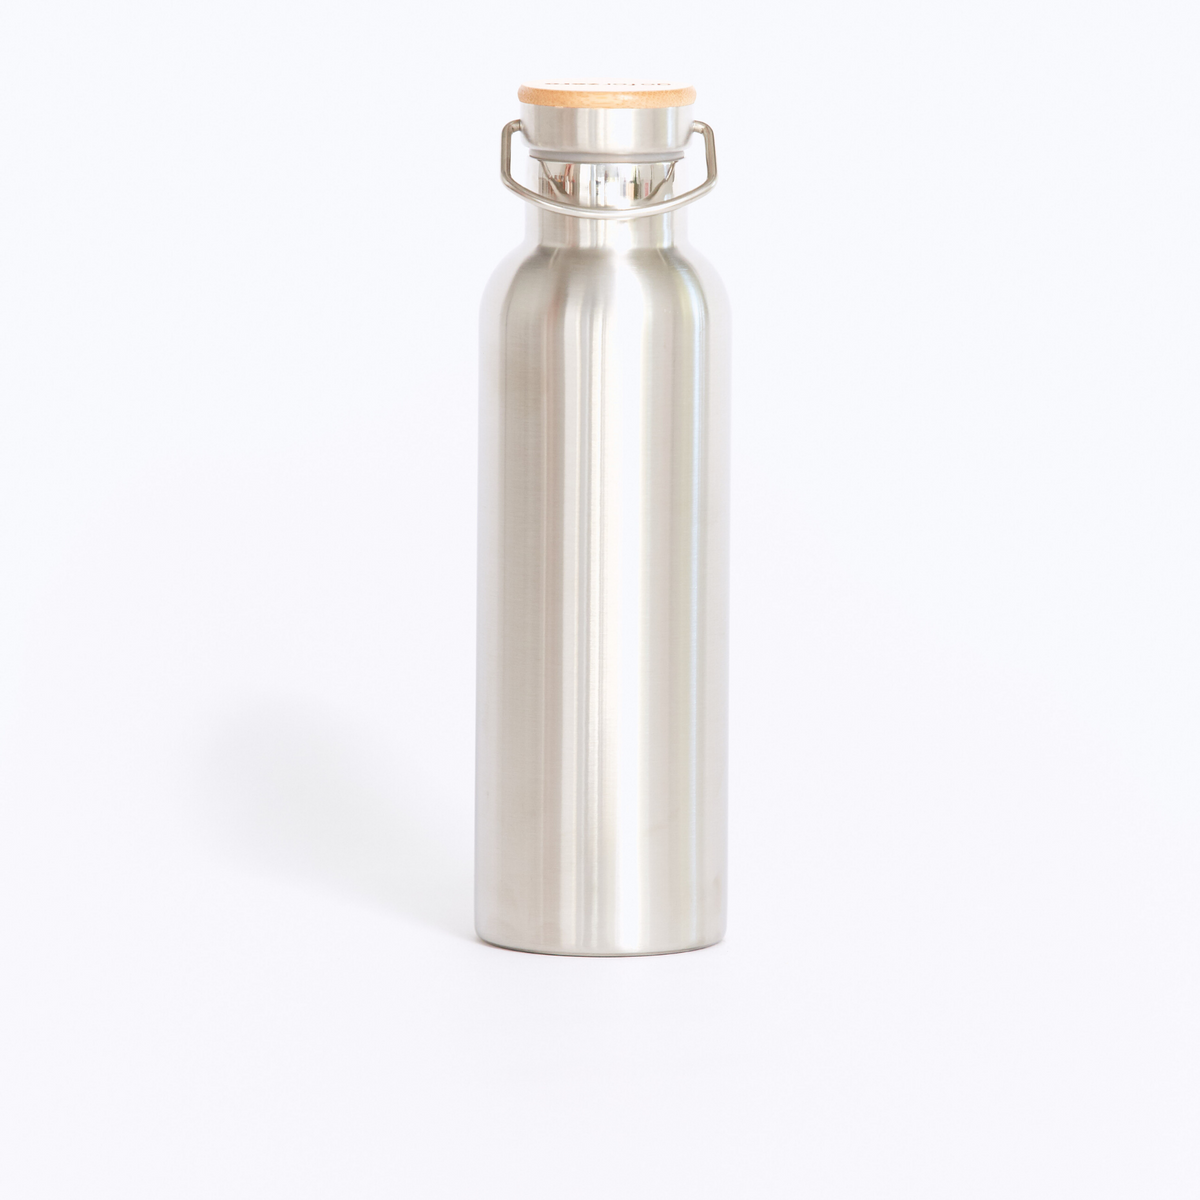 Smiley Face Plain Cartoon' Insulated Stainless Steel Water Bottle